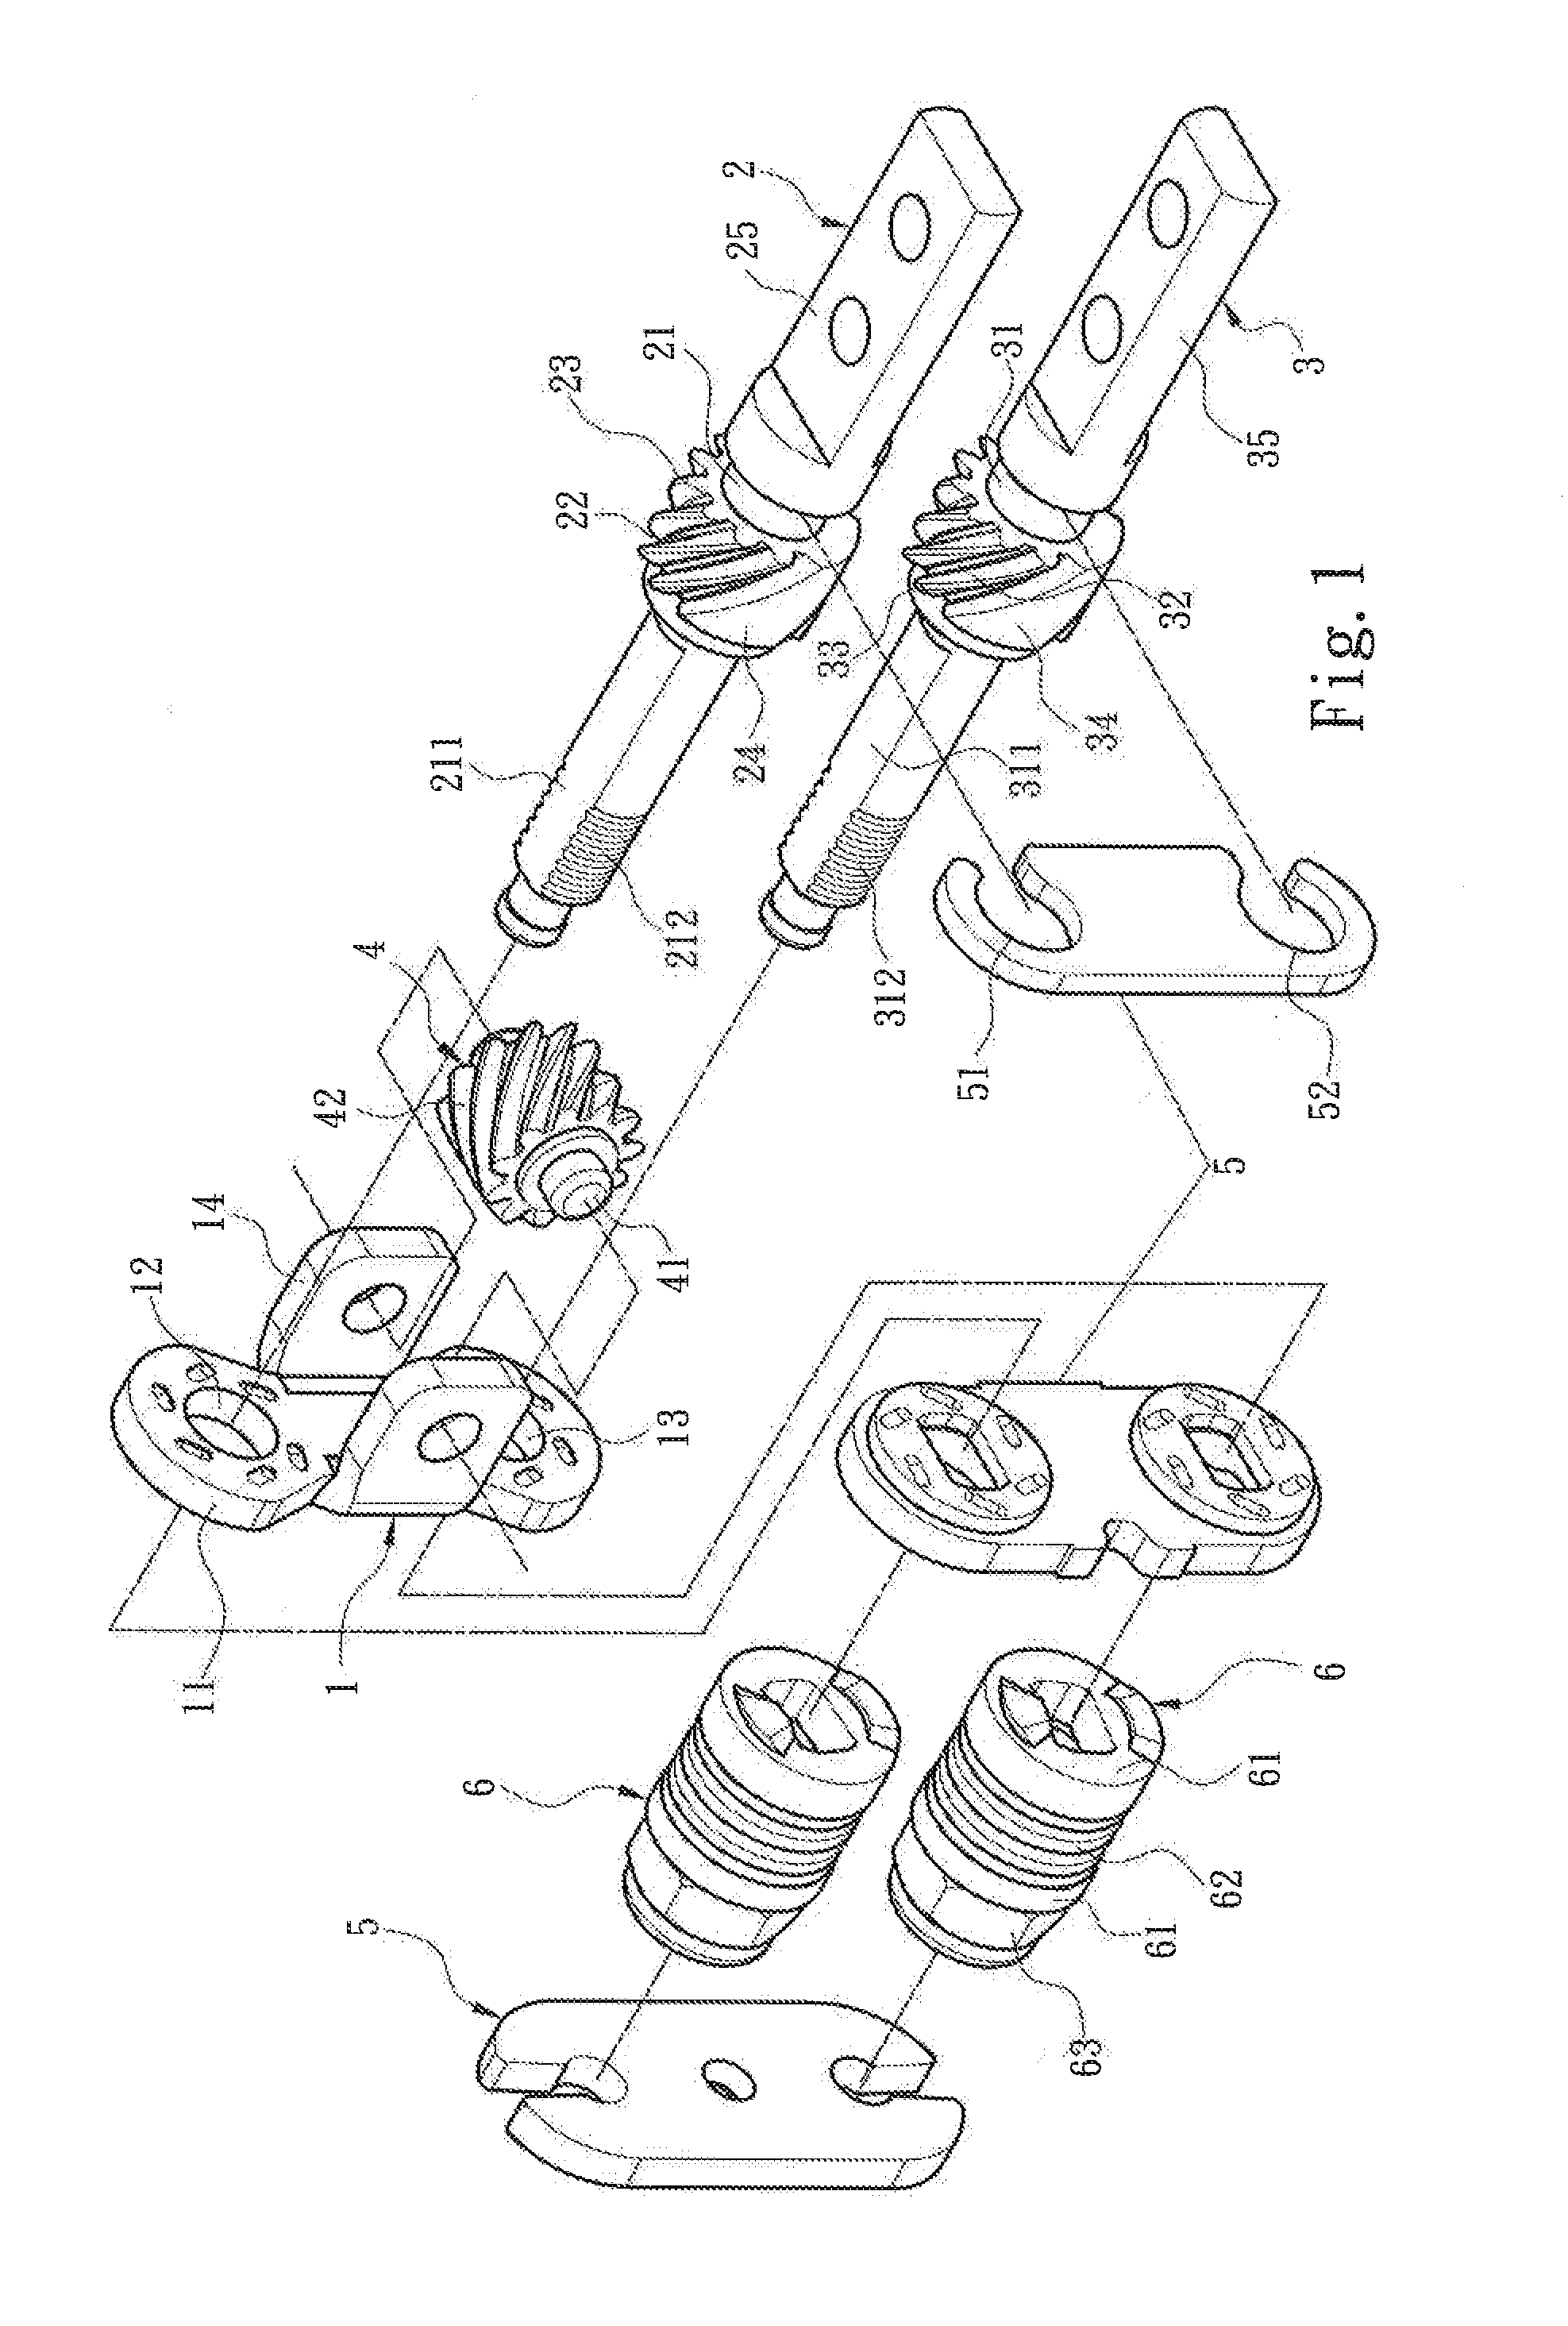 Durable synchronous opening and closing mechanism